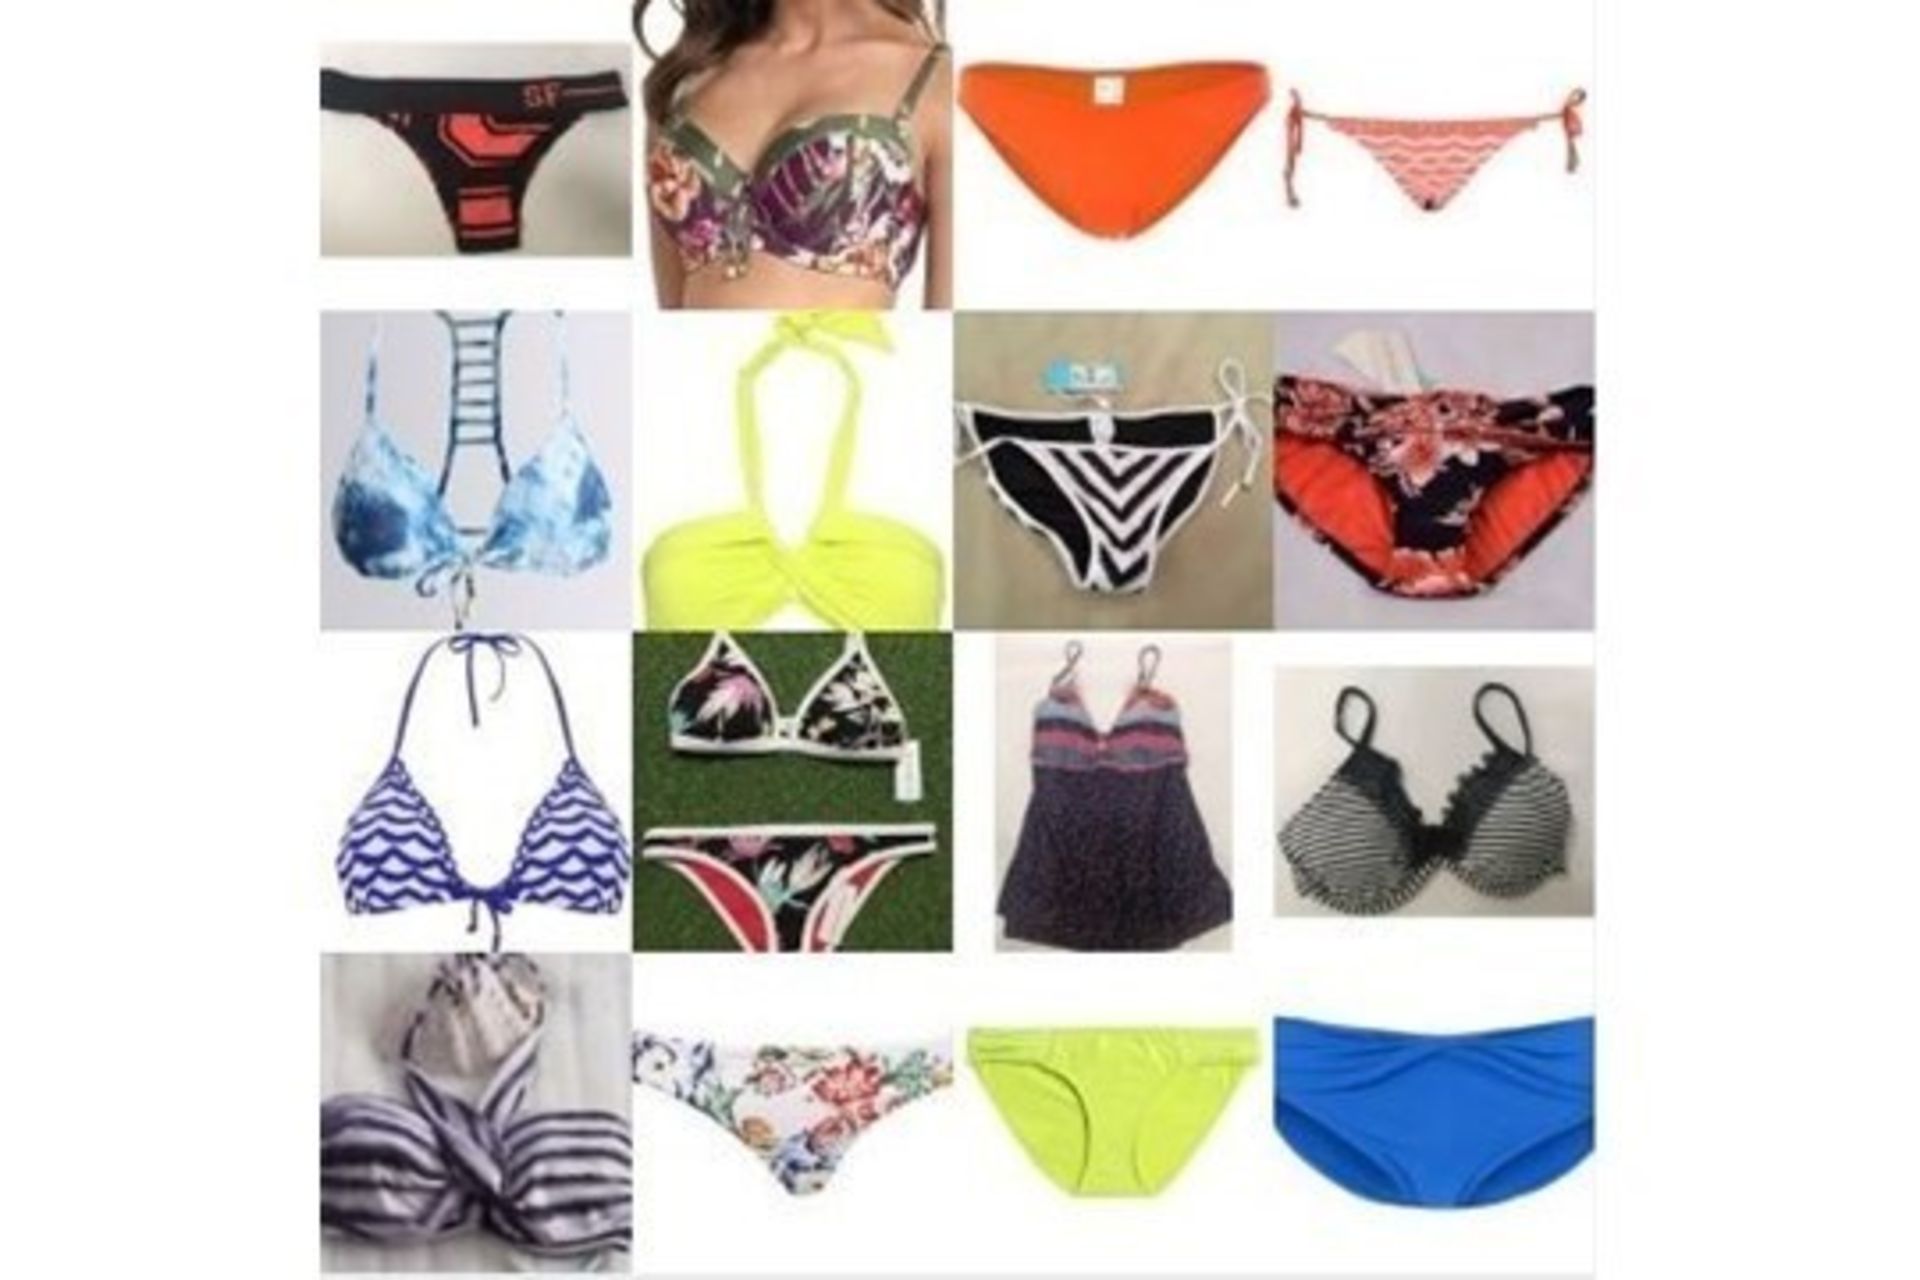 Brand New Bagged Seafolly Bikini Clothing Items (To Include Tops And Bottoms) Combined RRP £900